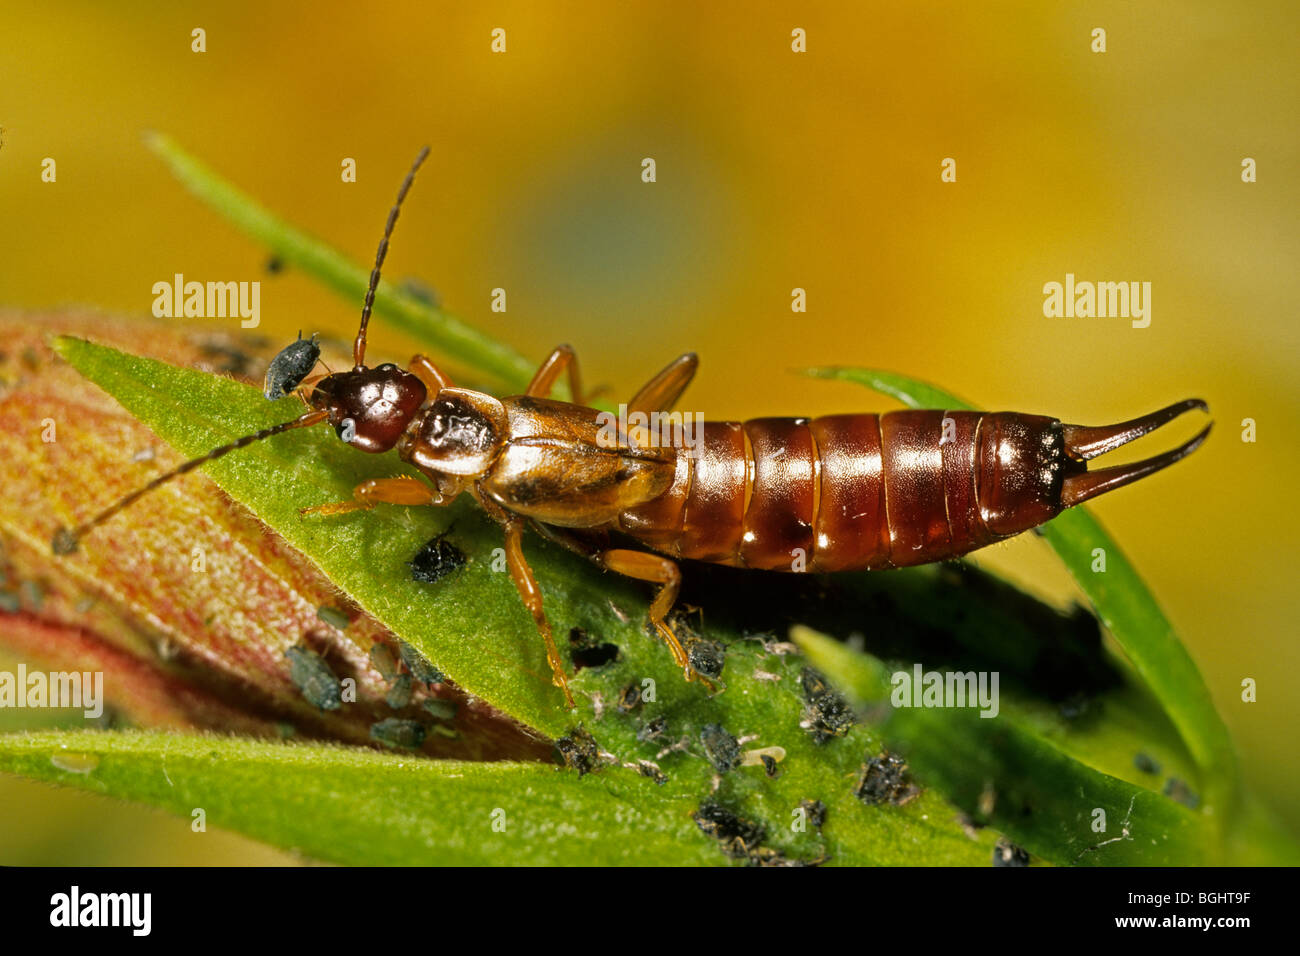 common-earwig-forficula-auricularia-female-eating-aphid-BGHT9F.jpg